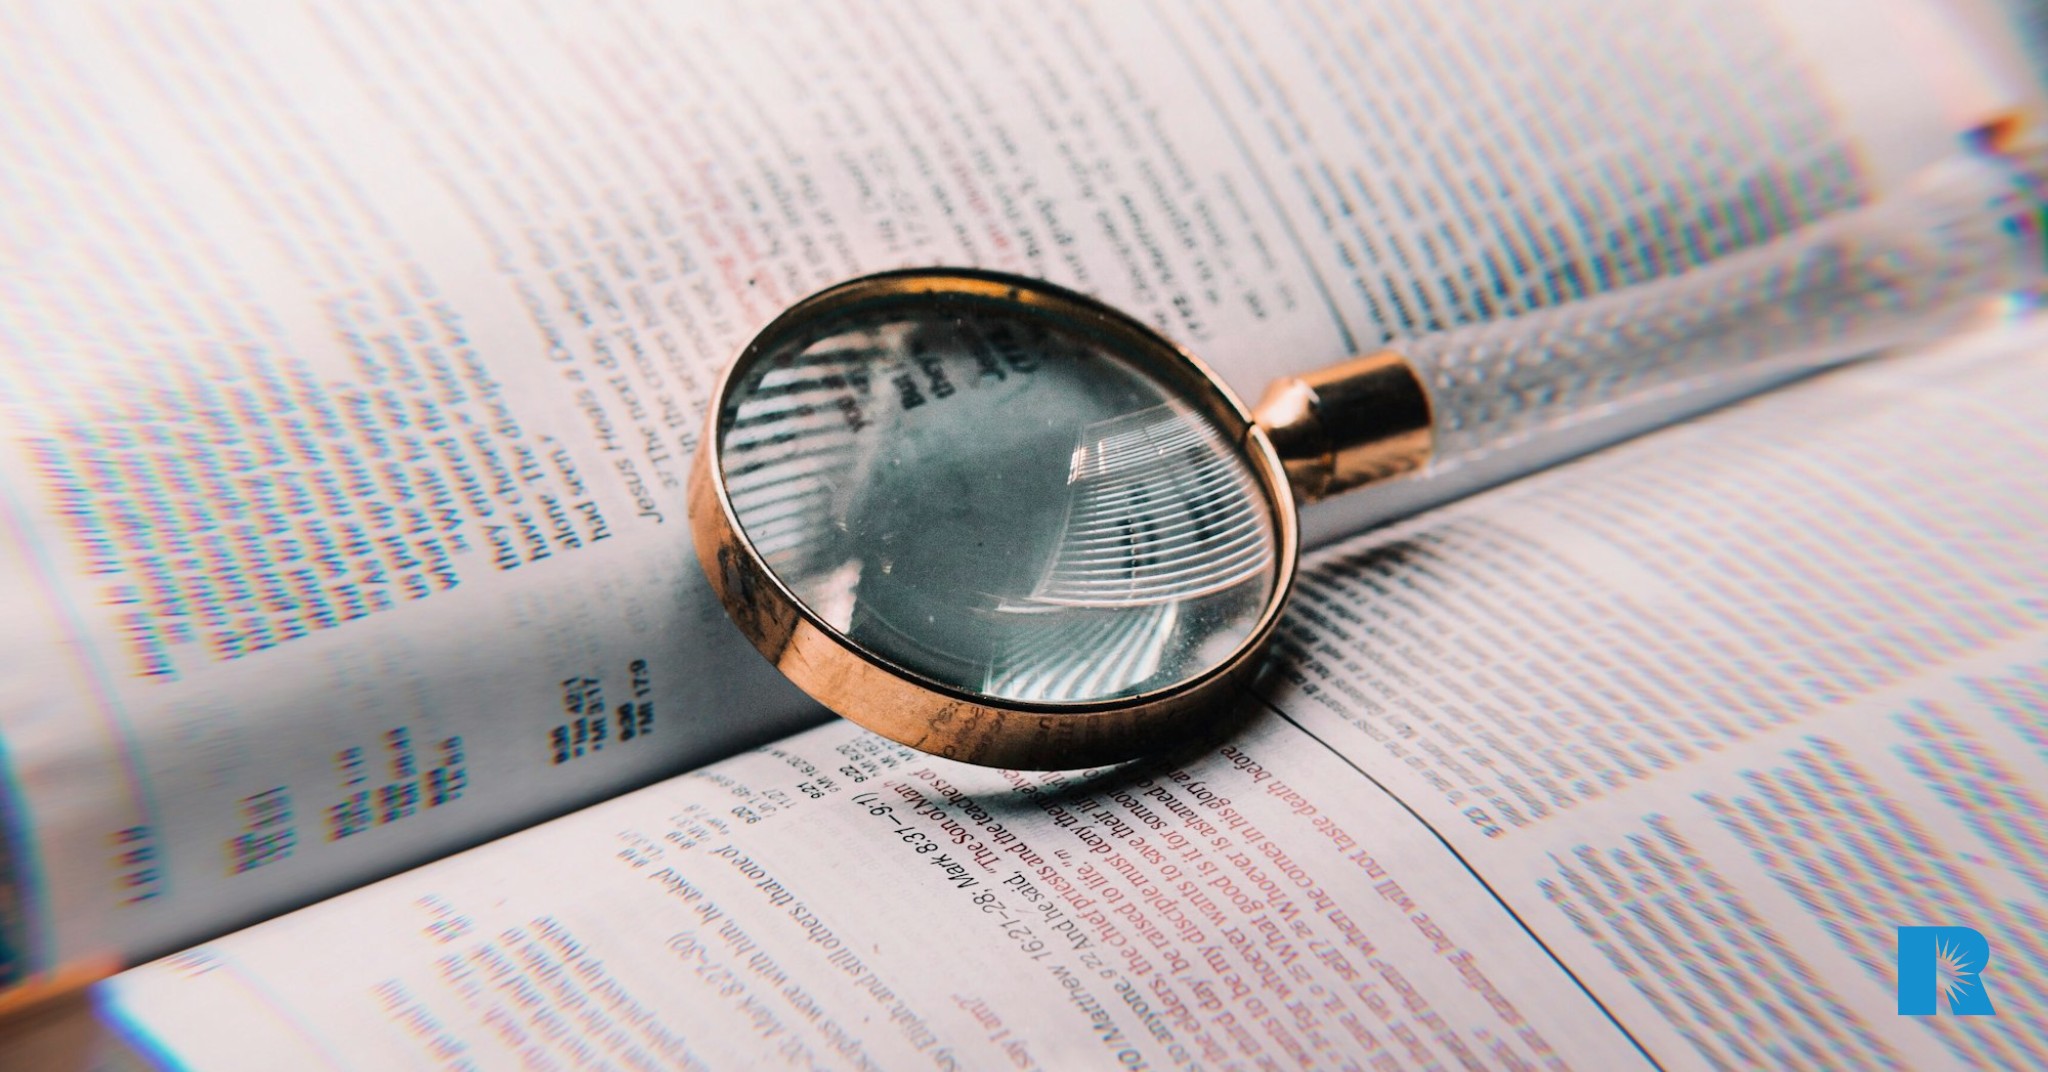 A magnifying glass used to read ancient texts.